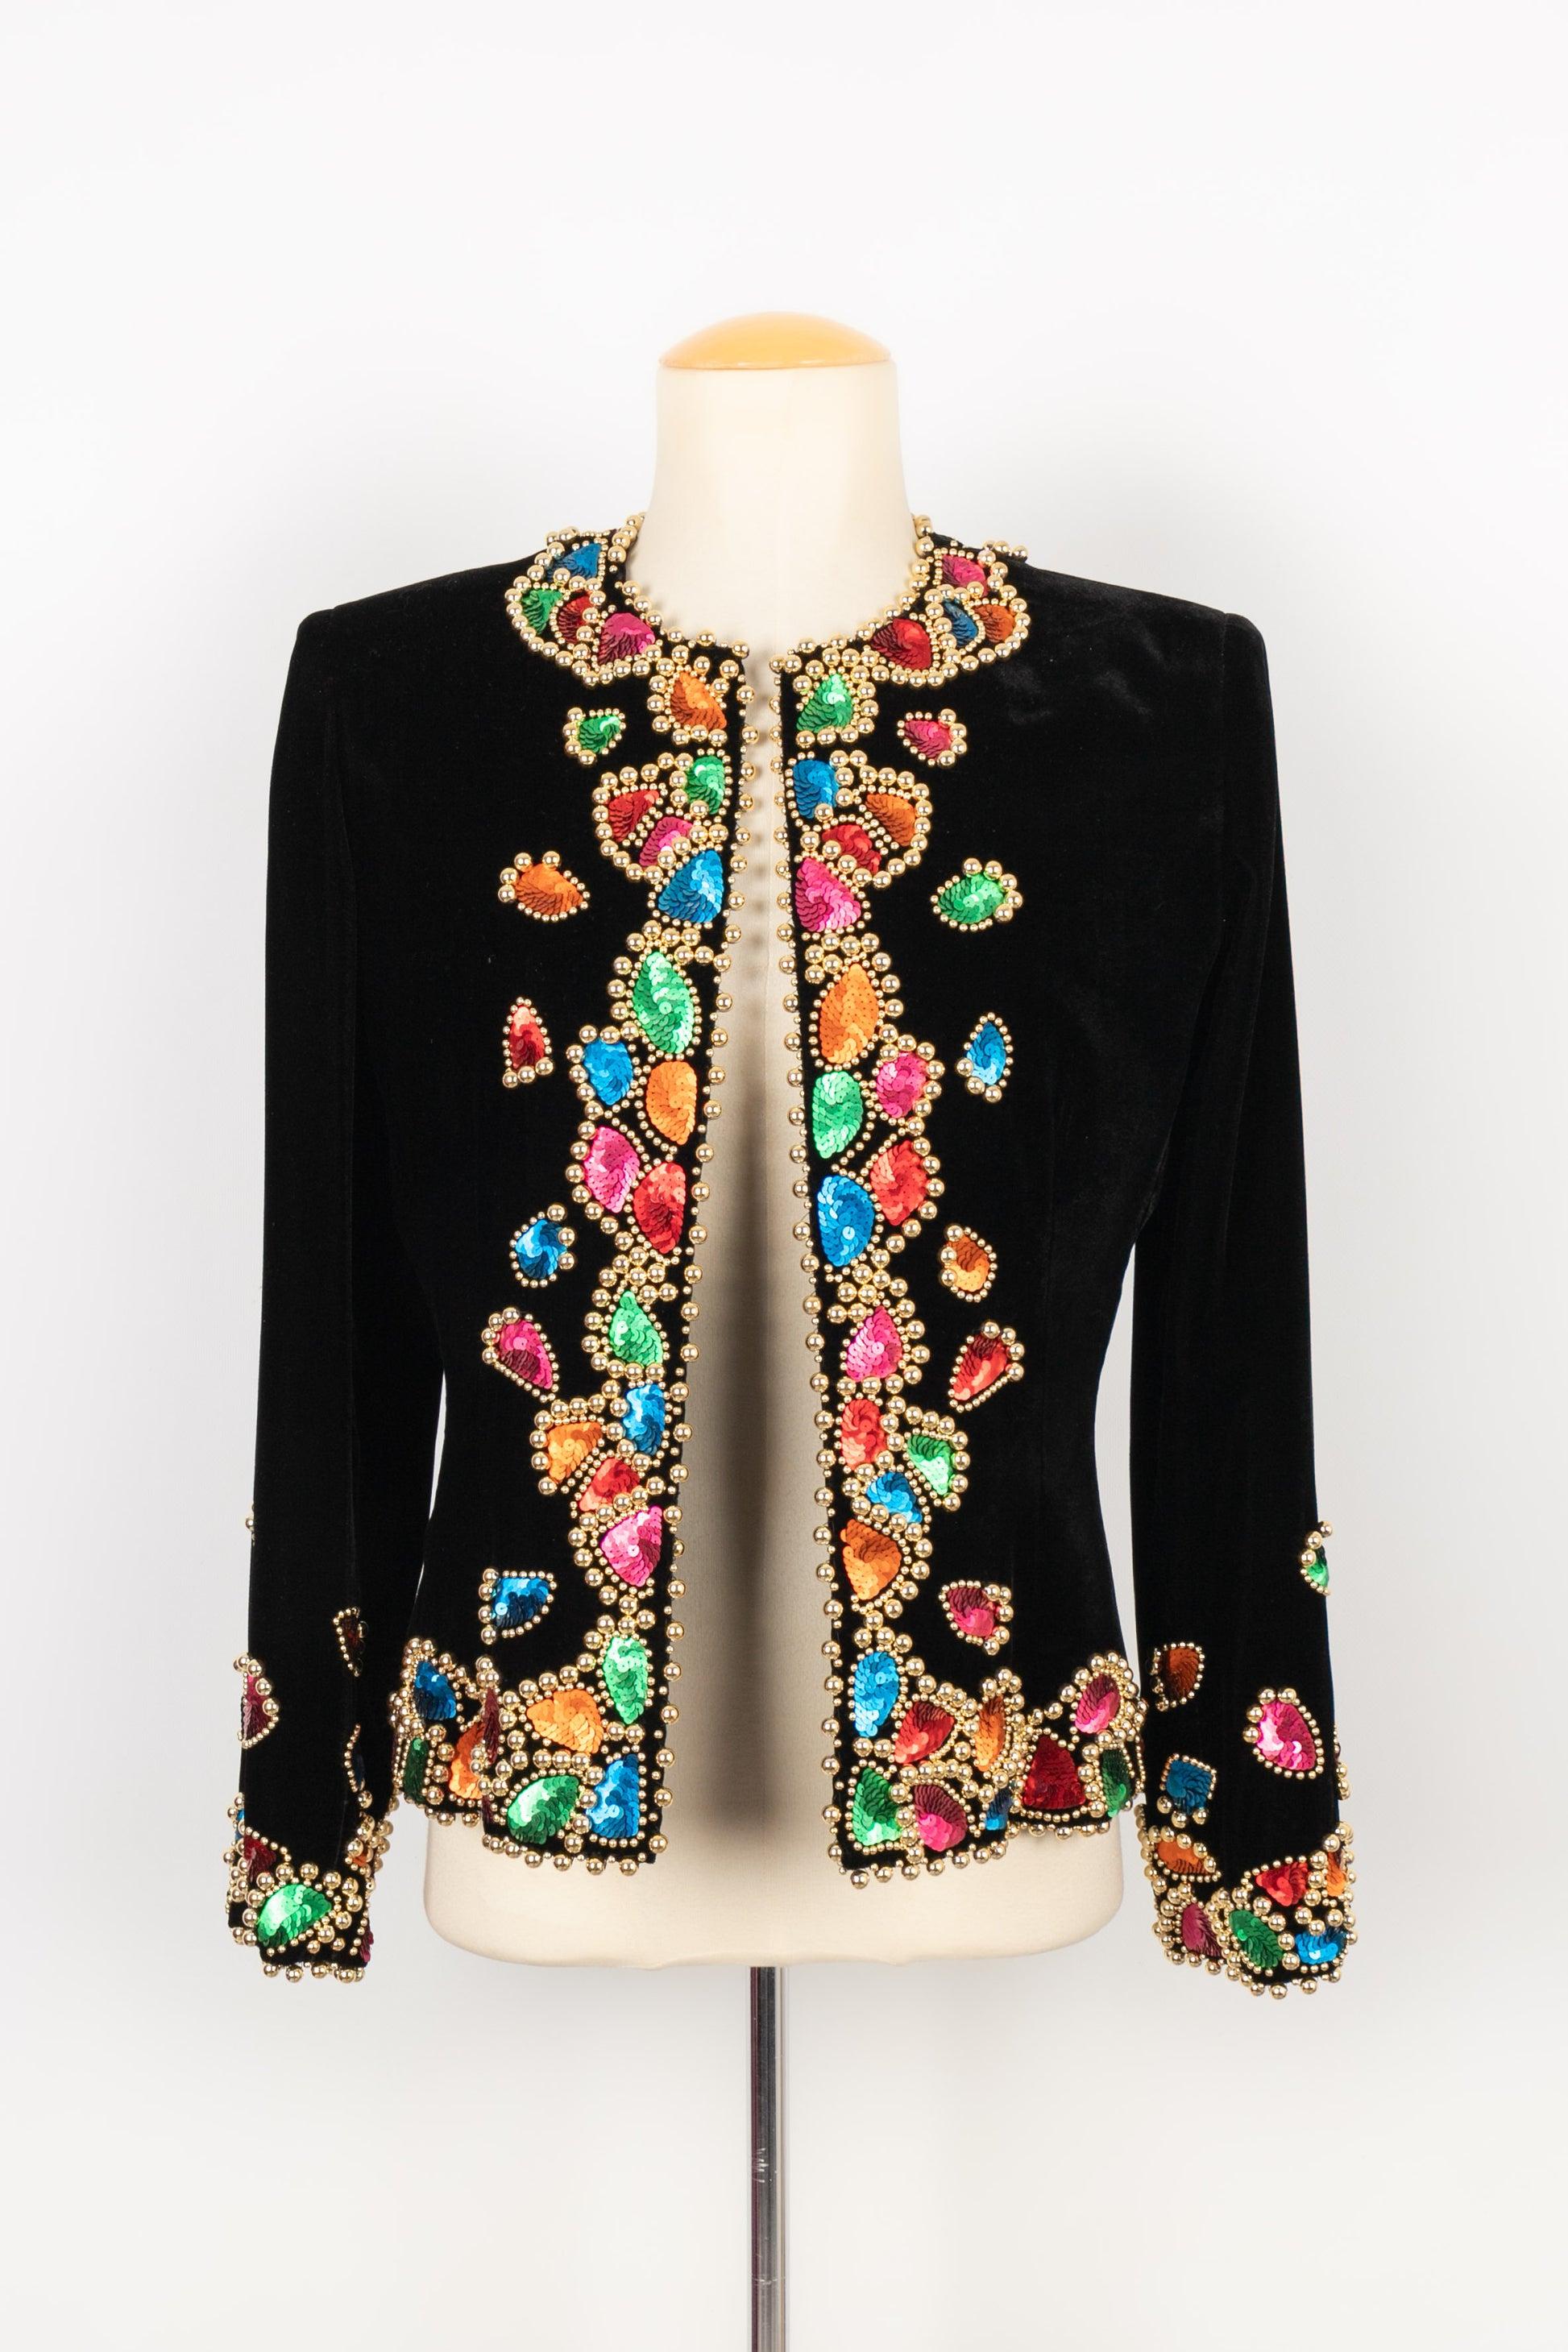 Women's Givenchy Set Composed of Jacket Highly Embroidered Jumpsuit, circa 1980